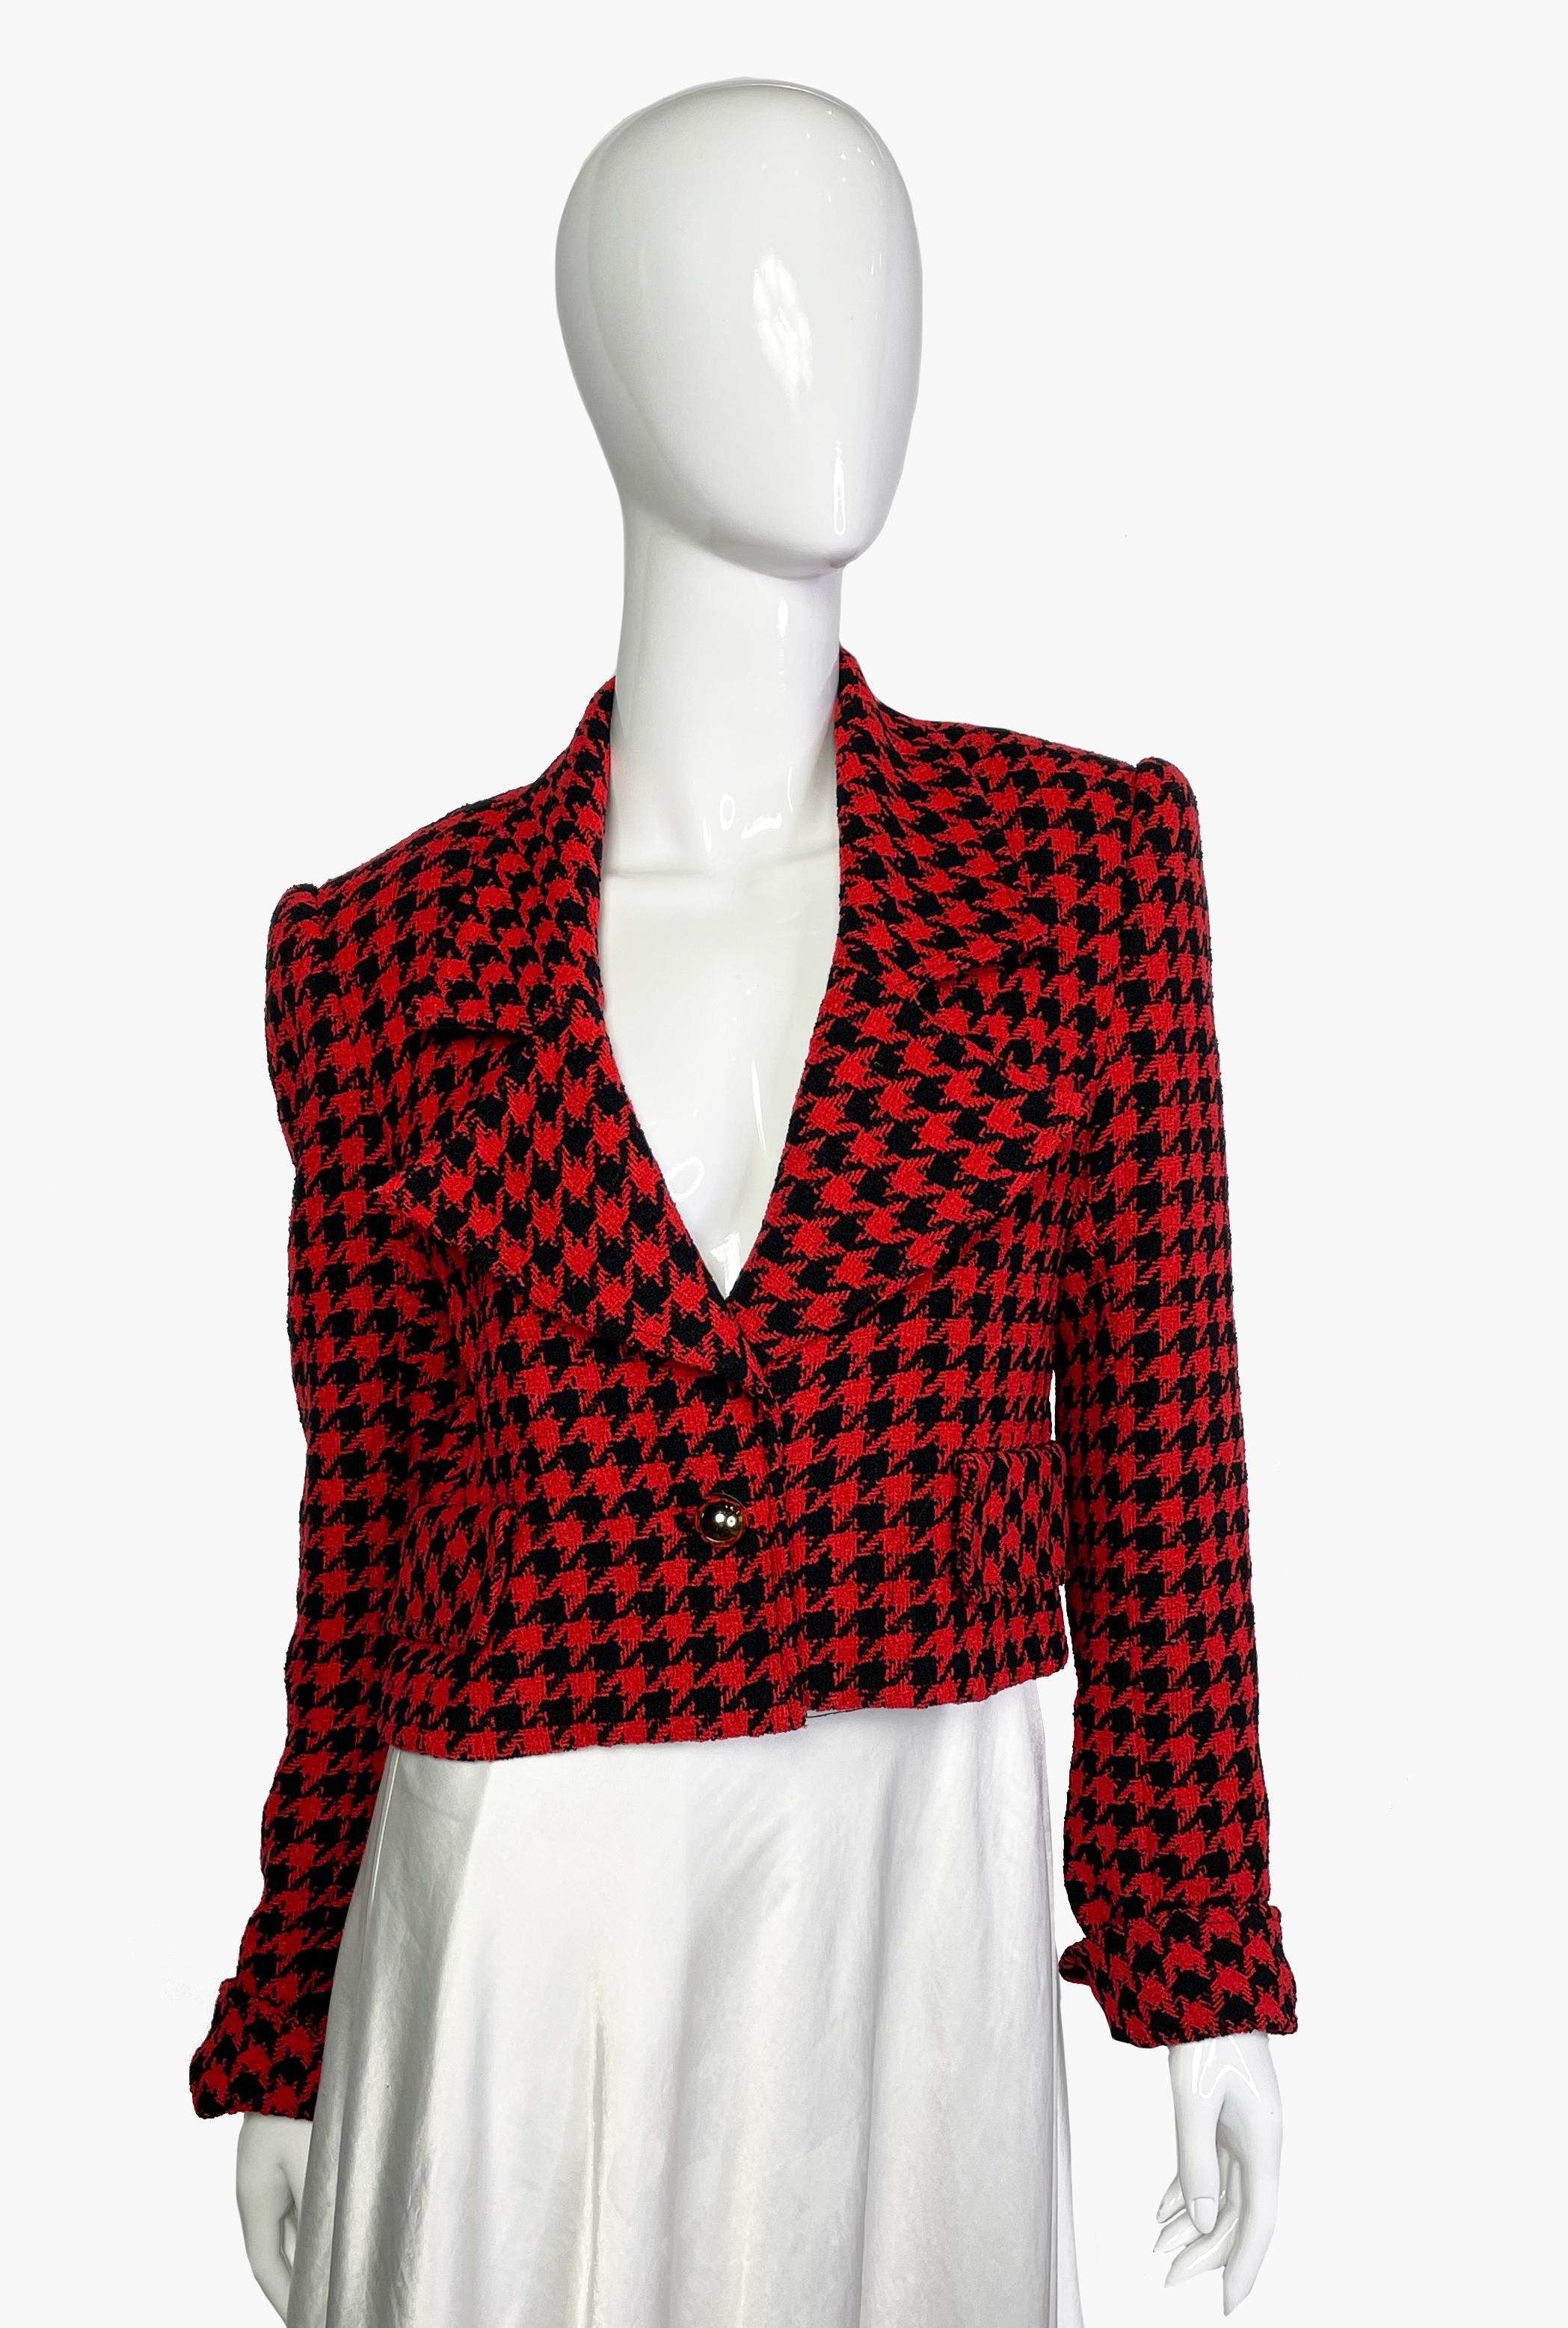 Vintage houndstooth crop jacket with gold buttons on the sleeve

Size – US 4/ S – M

Length – 45 cm / 17,7”

Shoulders – 44 cm / 17,3”

Sleeve – 62 cm / 24,4” without fold, 58 cm / 22,8” with fold

Armpit to armpit – 49 cm / 19,2”

Waist – 84 cm /